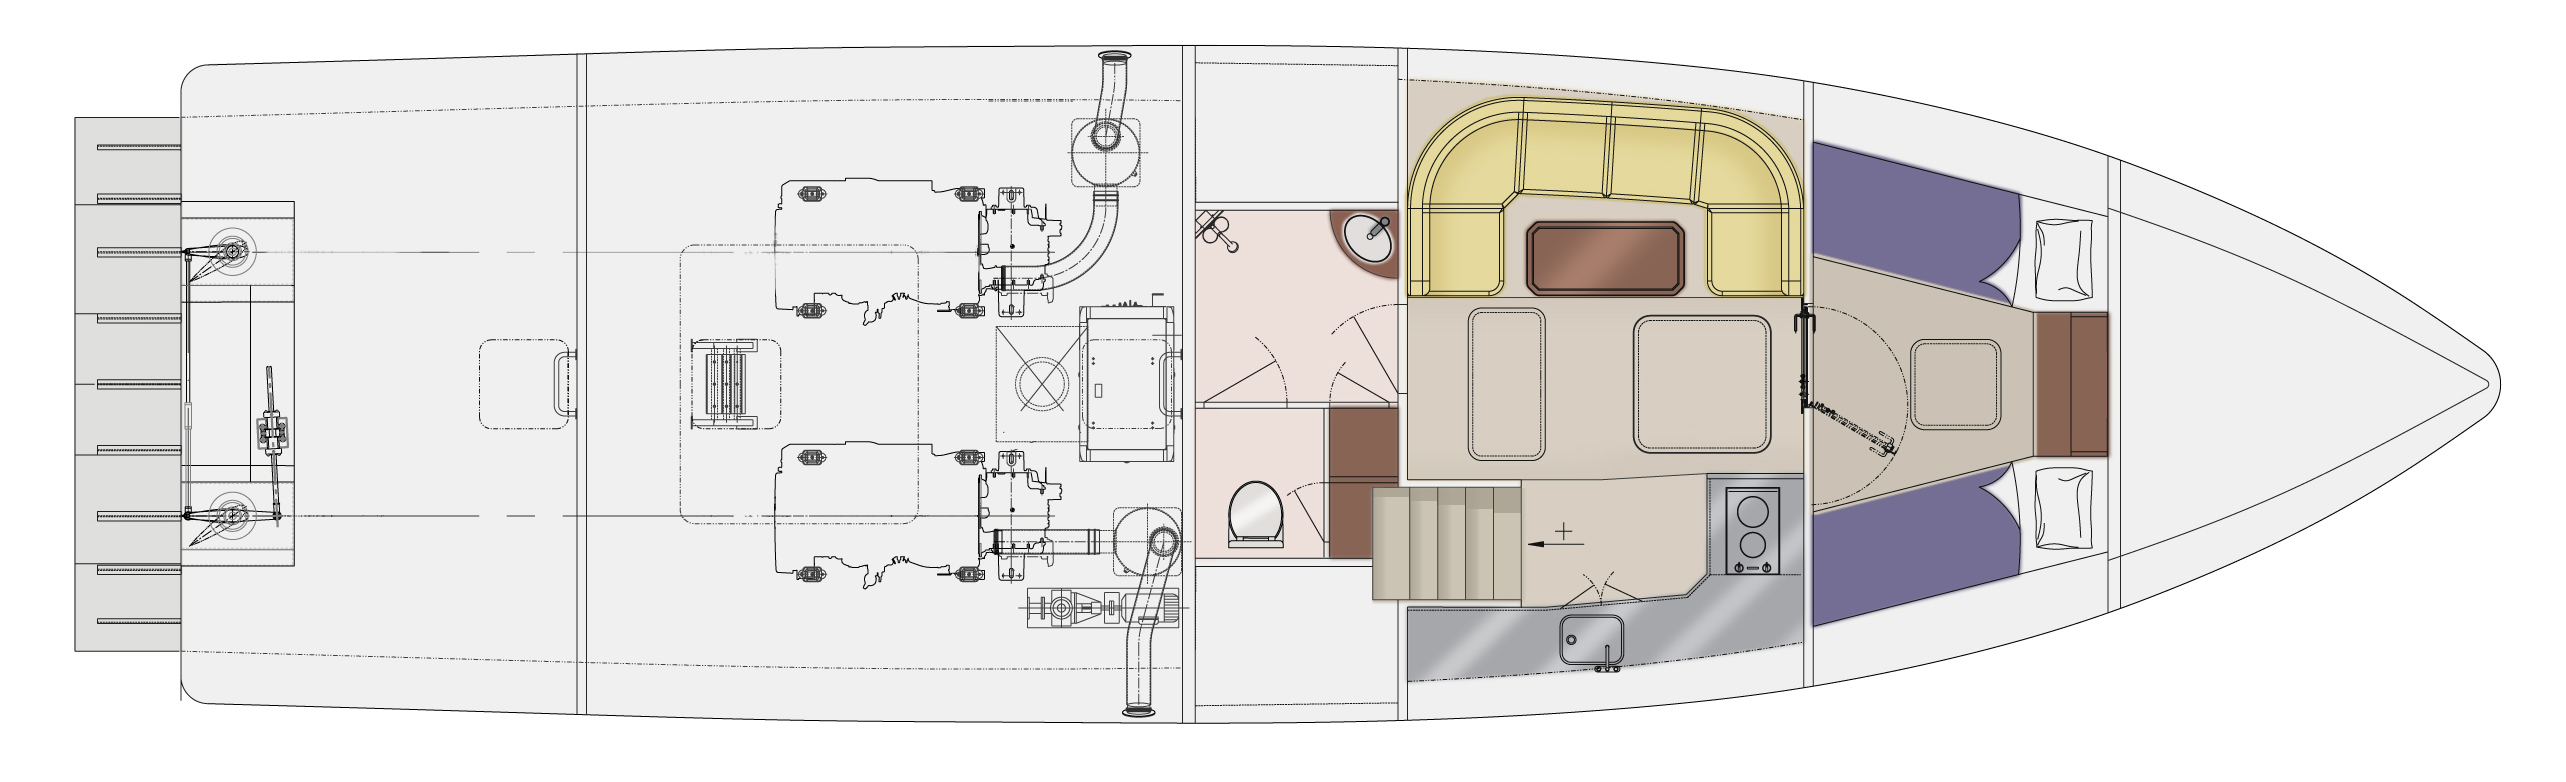 1832 (White Whale) High-speed Pilot Boat layout-1 (1)d47